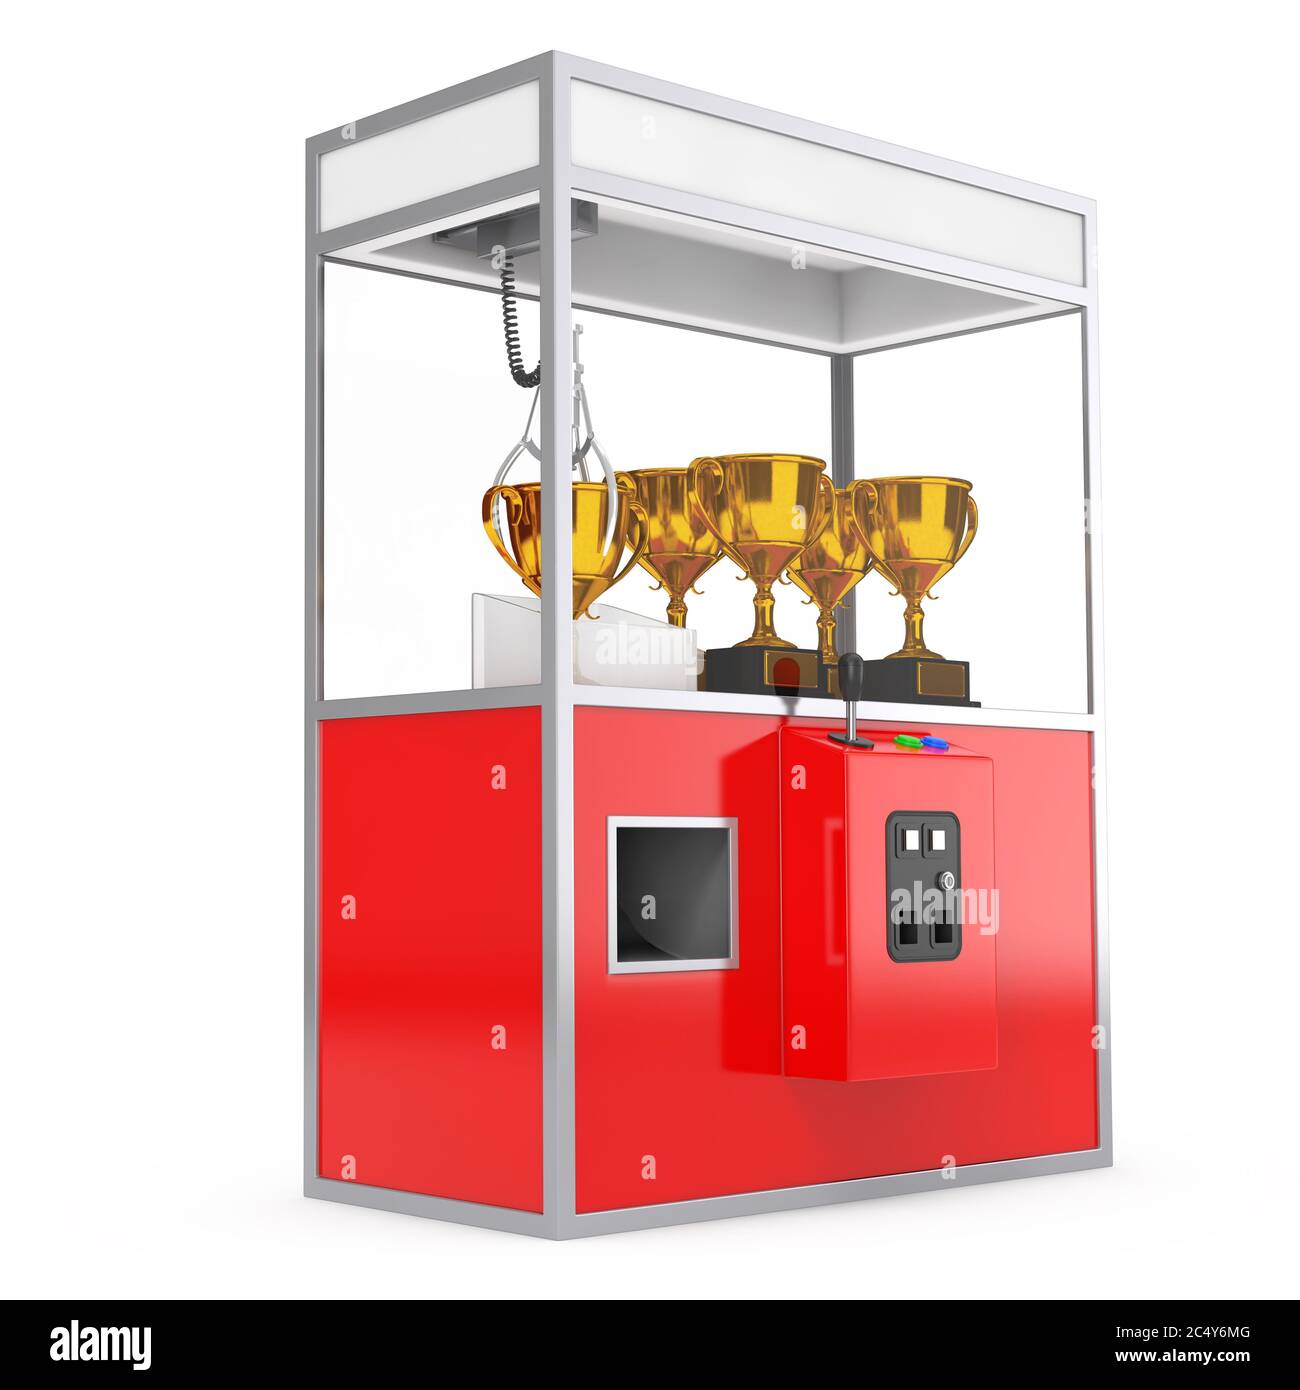 Carnival Red Toy Claw Crane Arcade Machine with Golden Trophy on a white background. 3d Rendering Stock Photo